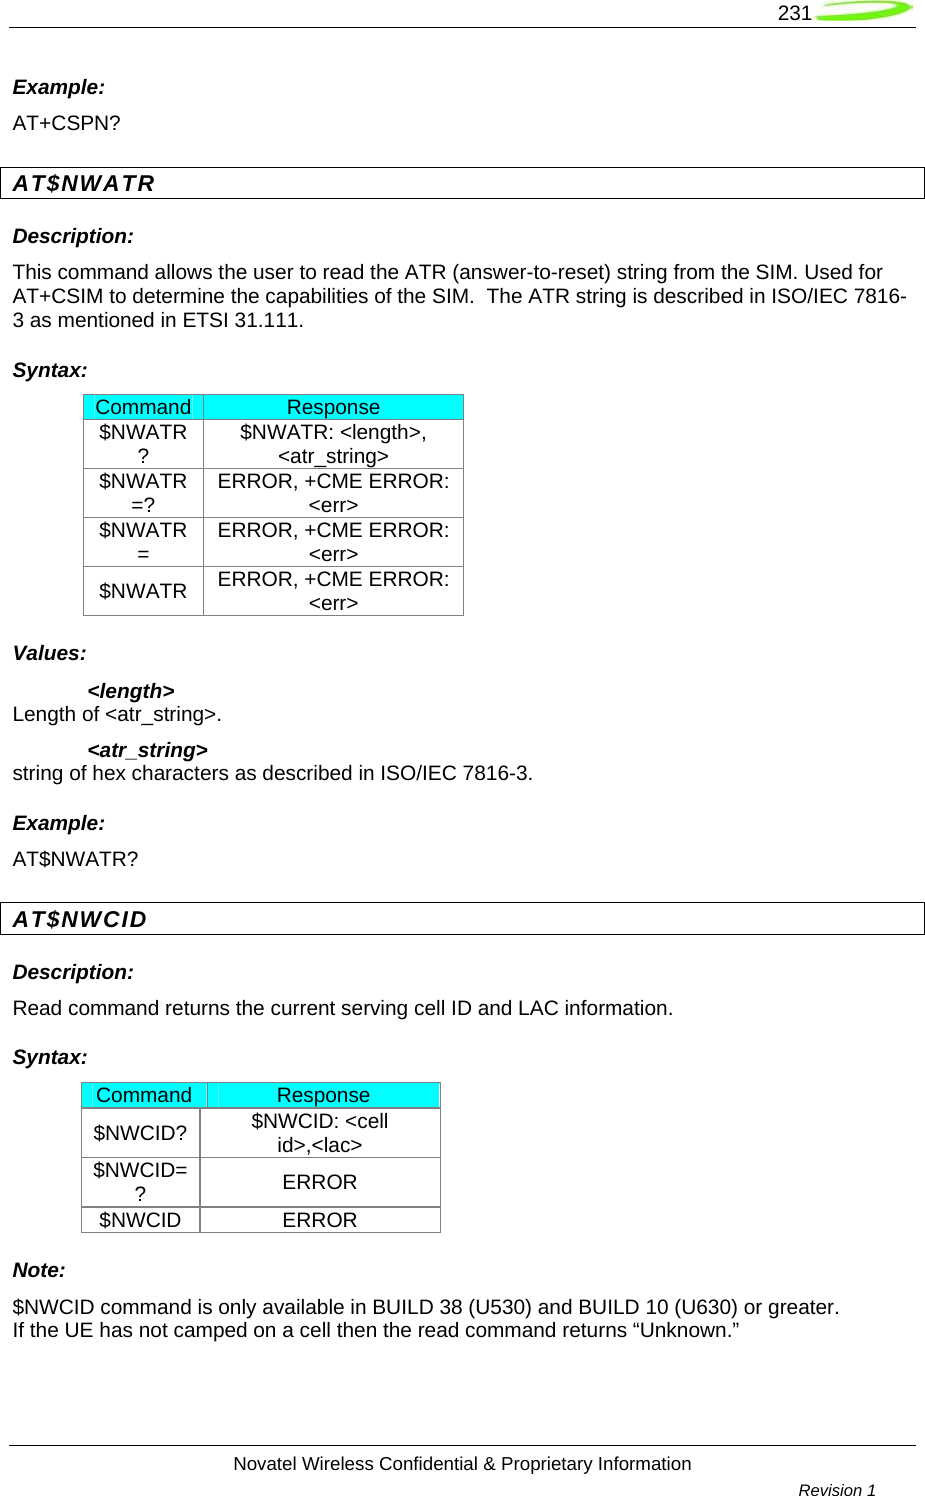   231  Novatel Wireless Confidential &amp; Proprietary Information        Revision 1   Example: AT+CSPN? AT$NWATR Description: This command allows the user to read the ATR (answer-to-reset) string from the SIM. Used for AT+CSIM to determine the capabilities of the SIM.  The ATR string is described in ISO/IEC 7816-3 as mentioned in ETSI 31.111. Syntax: Command  Response $NWATR?  $NWATR: &lt;length&gt;, &lt;atr_string&gt; $NWATR=?  ERROR, +CME ERROR: &lt;err&gt; $NWATR=  ERROR, +CME ERROR: &lt;err&gt; $NWATR  ERROR, +CME ERROR: &lt;err&gt; Values: &lt;length&gt; Length of &lt;atr_string&gt;.  &lt;atr_string&gt; string of hex characters as described in ISO/IEC 7816-3. Example: AT$NWATR? AT$NWCID Description: Read command returns the current serving cell ID and LAC information. Syntax: Command  Response $NWCID?  $NWCID: &lt;cell id&gt;,&lt;lac&gt; $NWCID=?  ERROR $NWCID ERROR Note: $NWCID command is only available in BUILD 38 (U530) and BUILD 10 (U630) or greater. If the UE has not camped on a cell then the read command returns “Unknown.” 